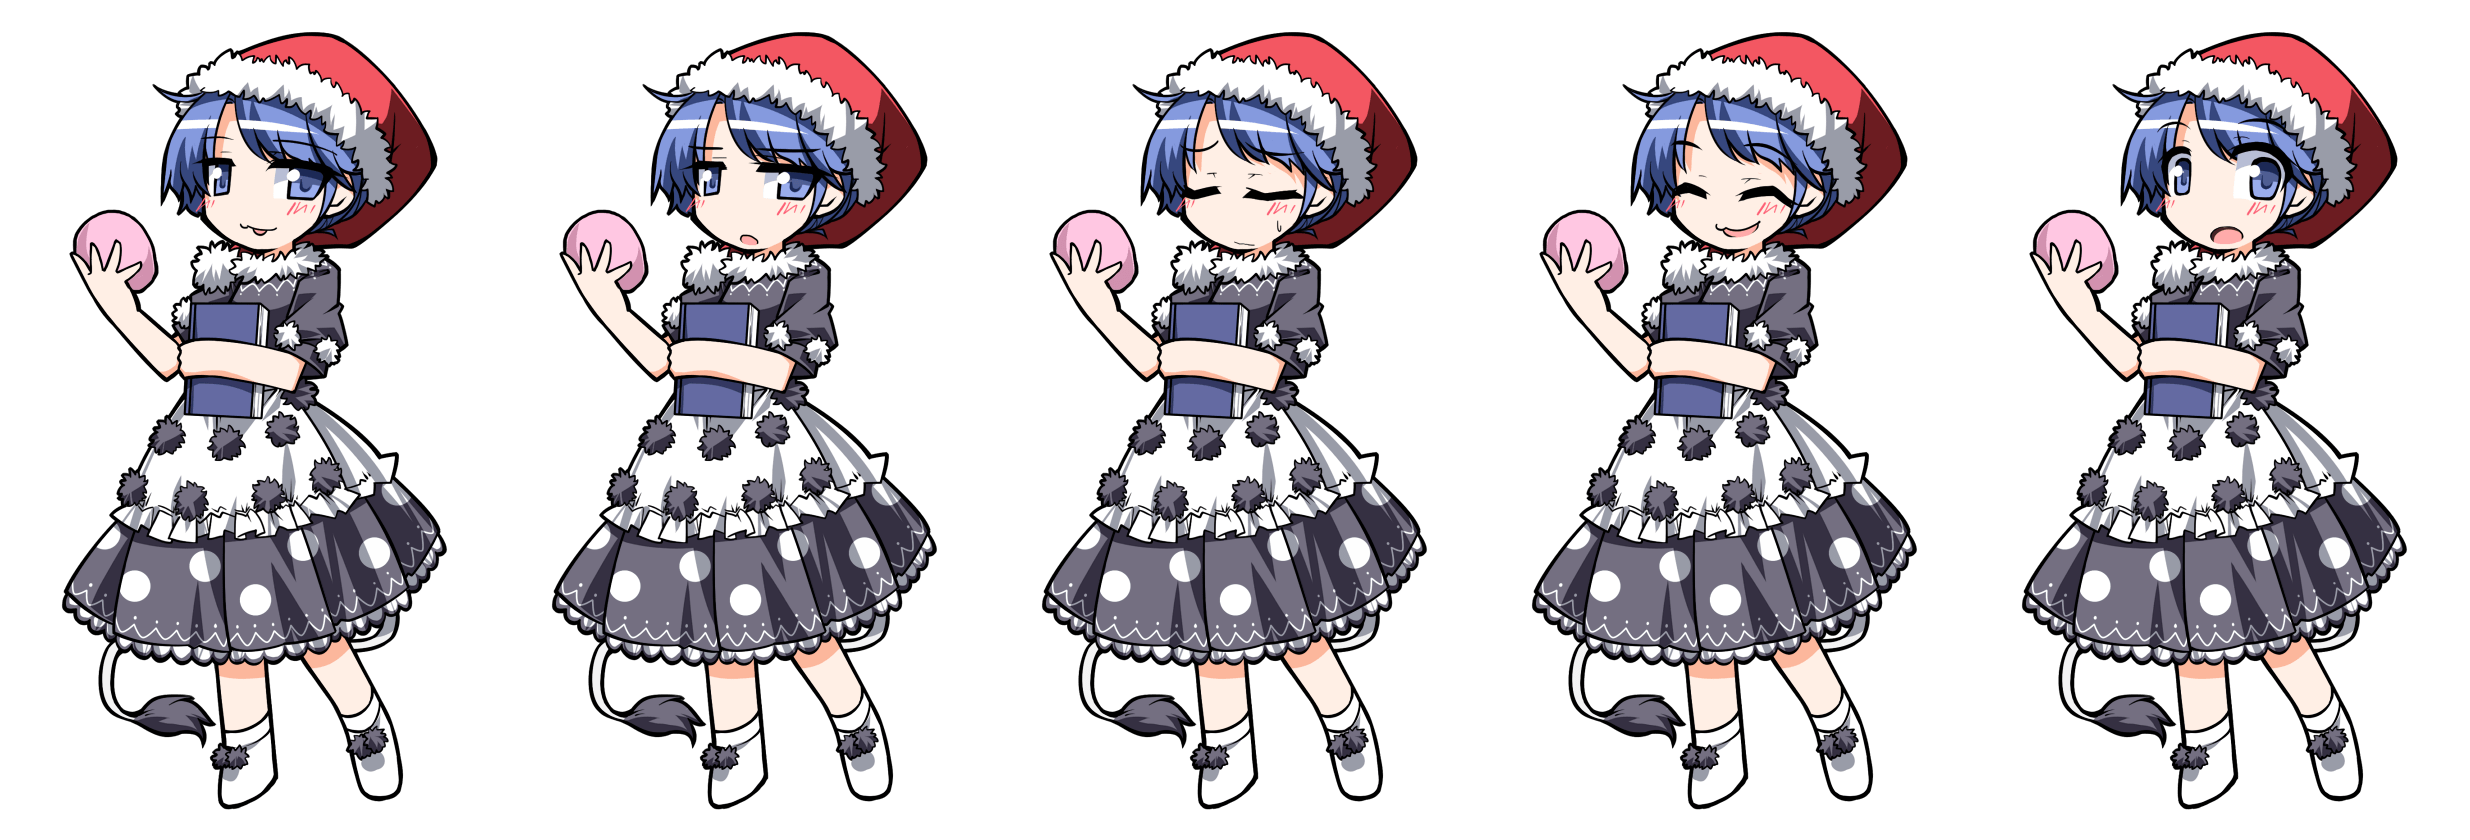 Touhou Puppet Dance Performance (Touhoumon) - Doremy Sweet